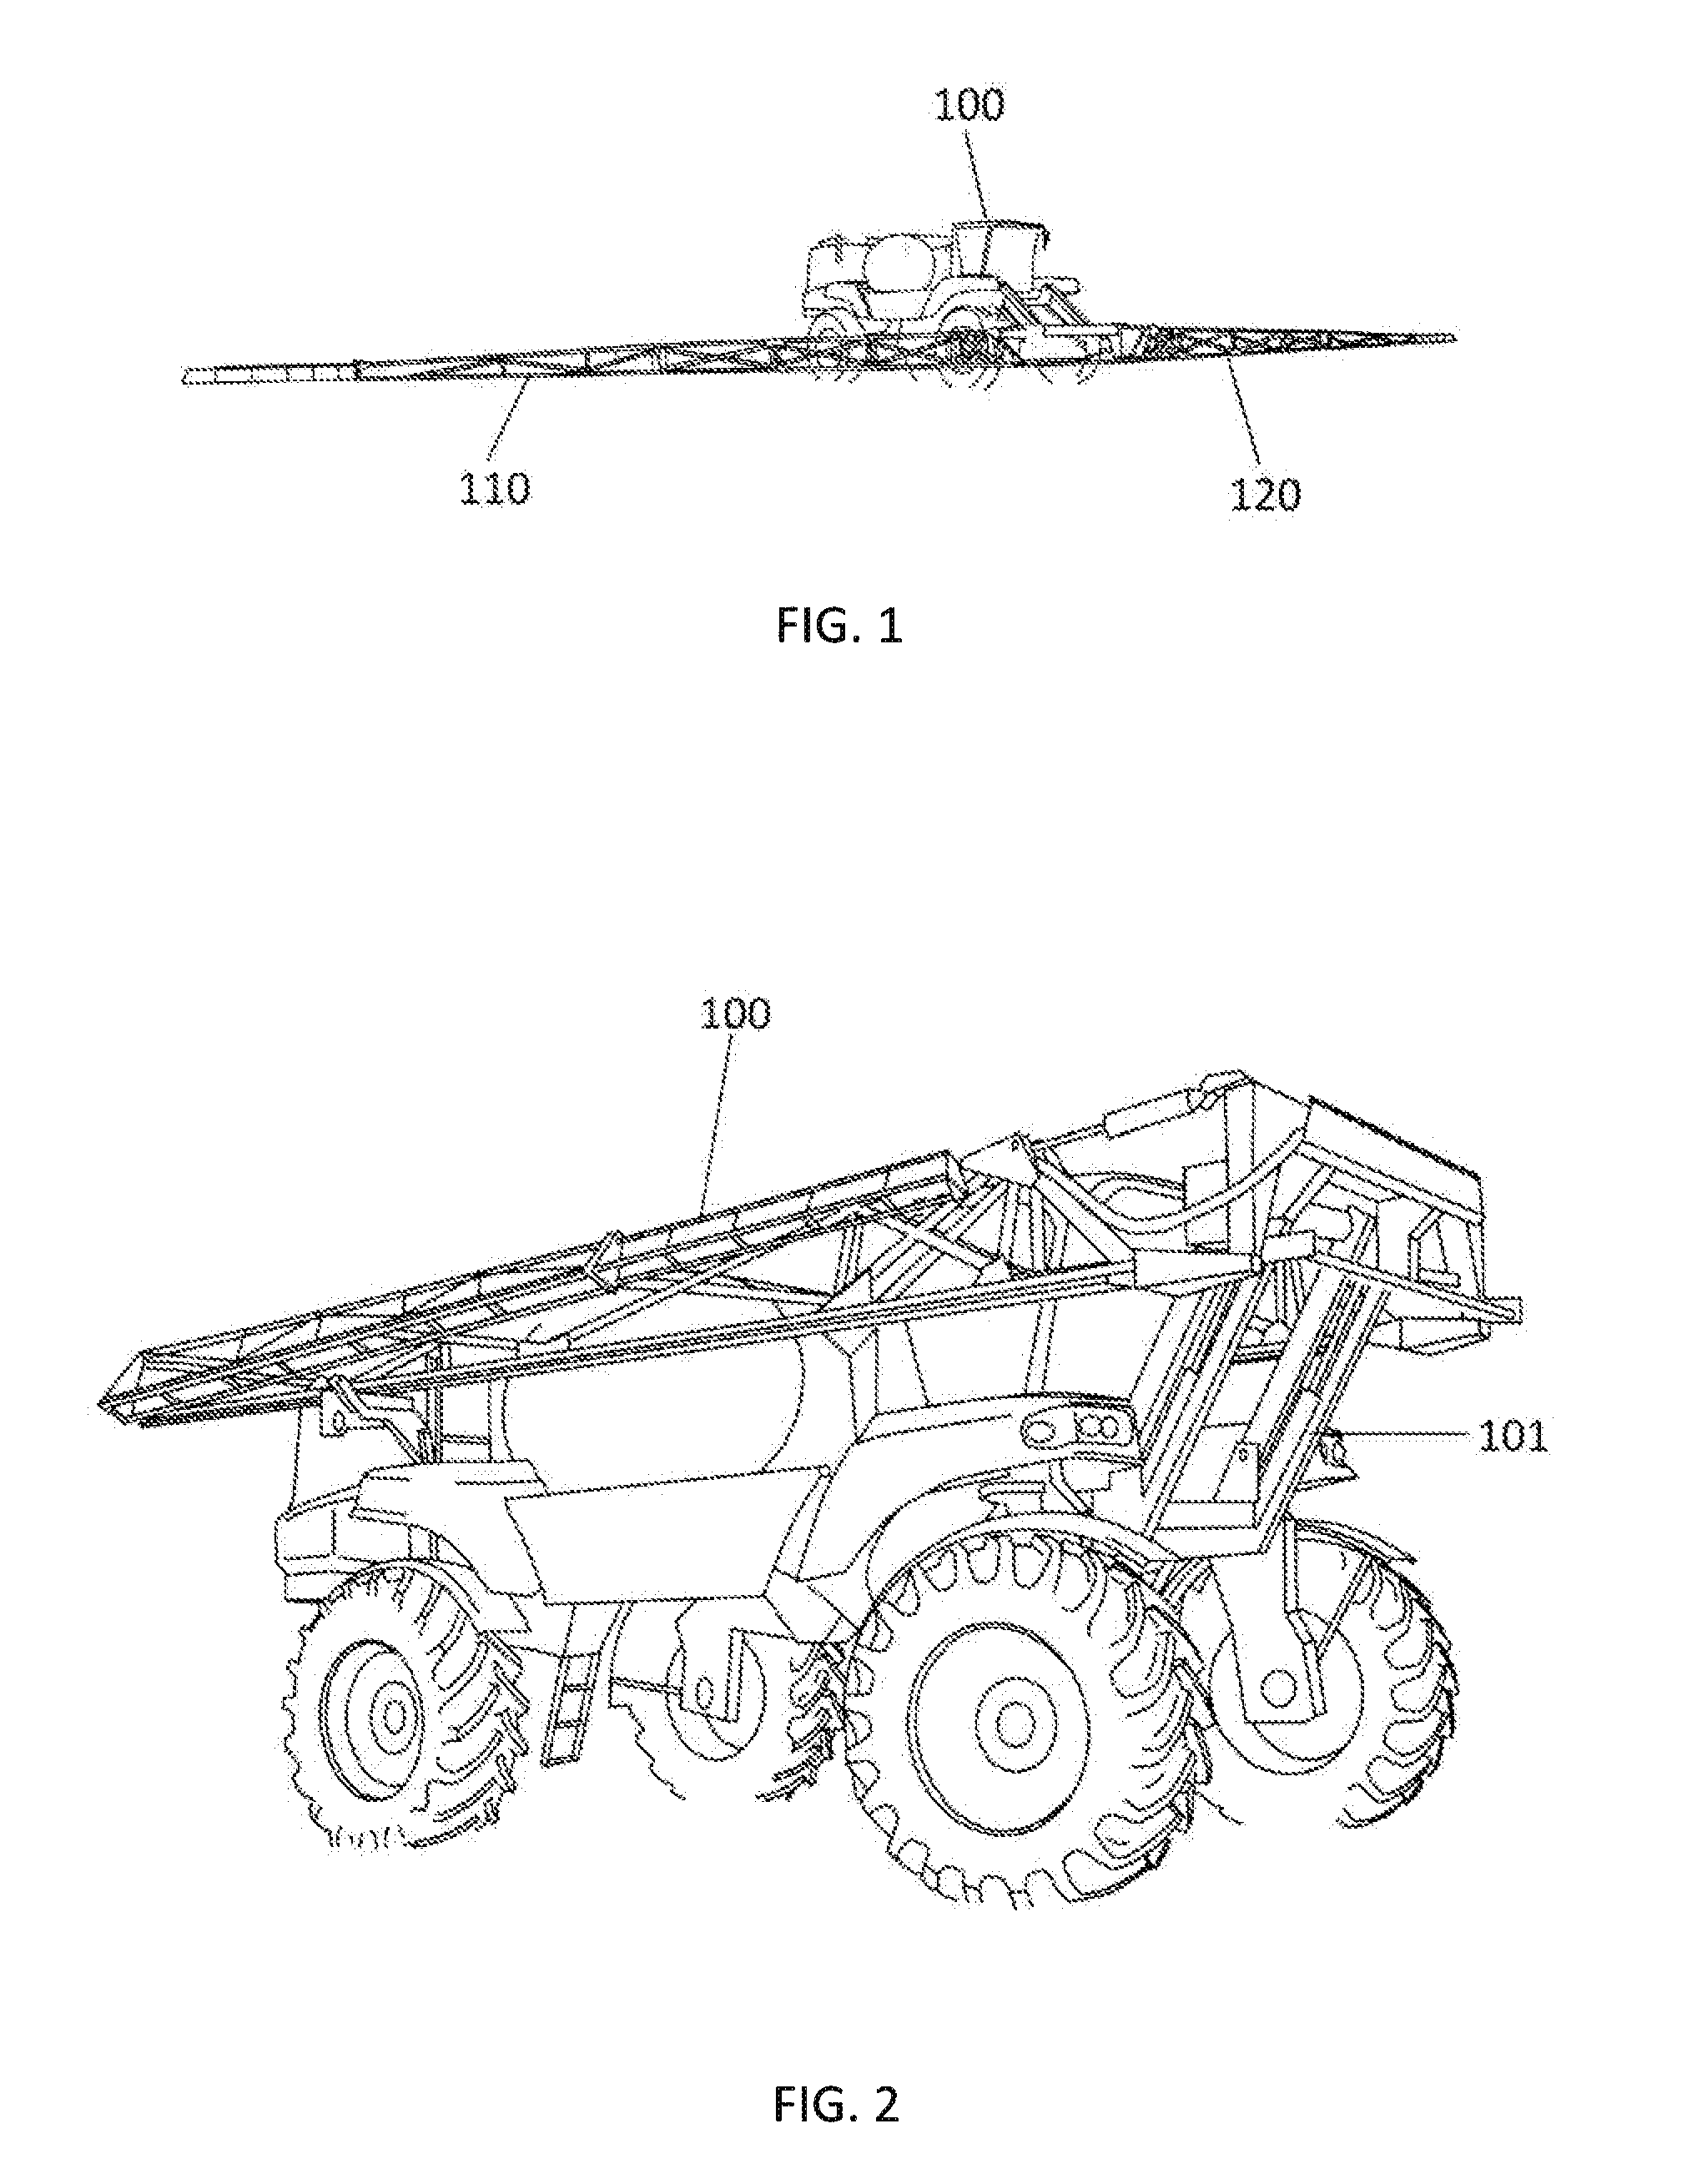 Planar Linkage, Methods of Decoupling, Mitigating Shock and Resonance, and Controlling Agricultural Spray Booms Mounted on Ground Vehicles